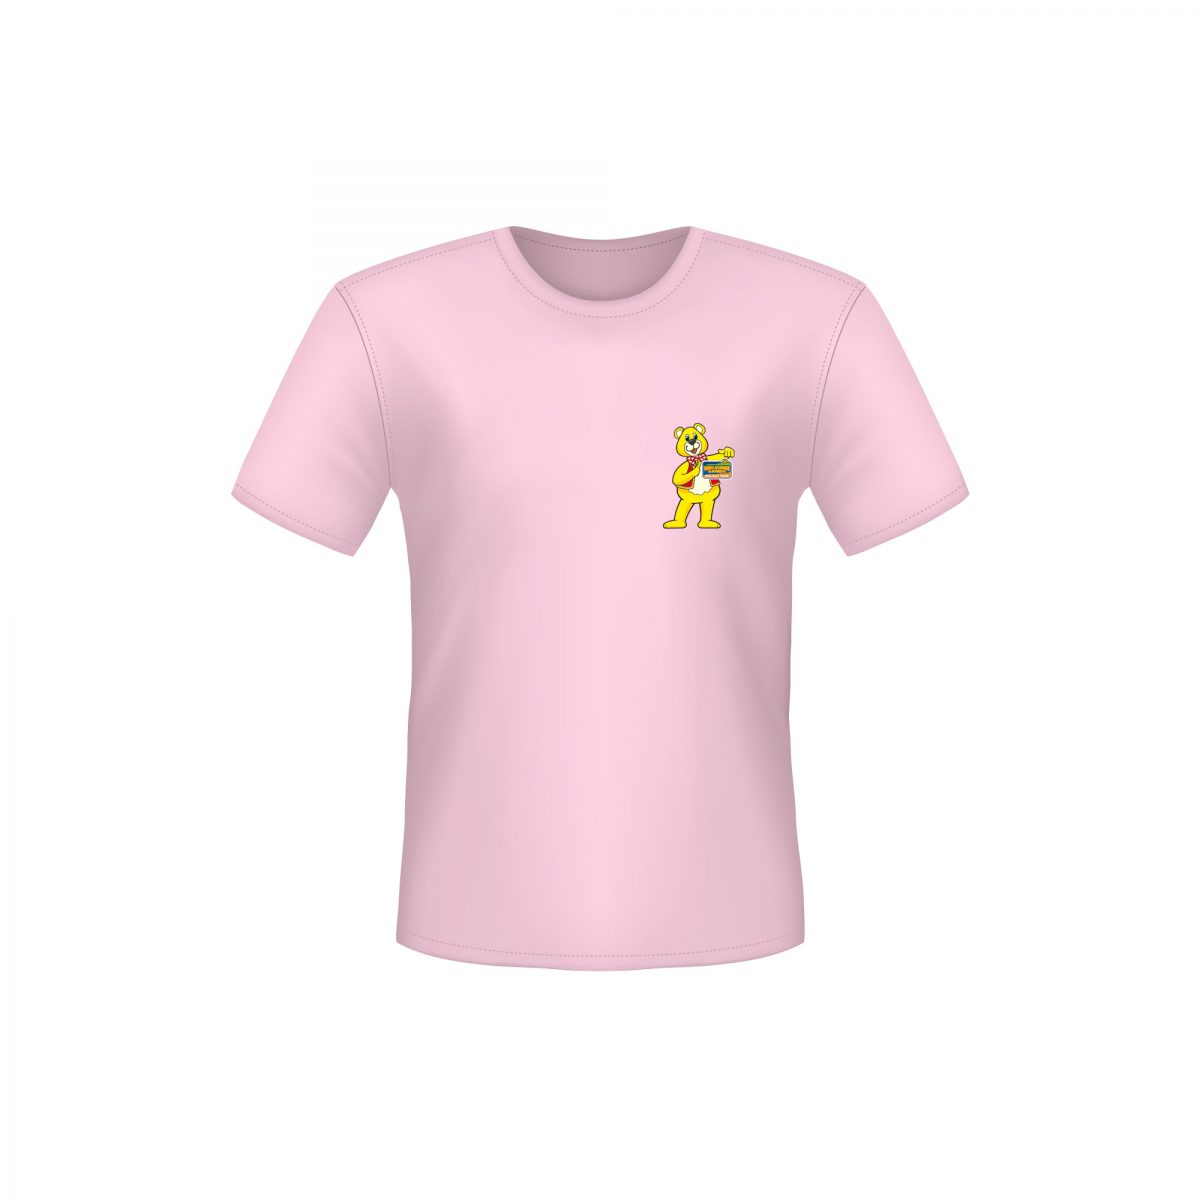 A Pink T-Shirt with a Woolly Bear Logo on the left side of the chest